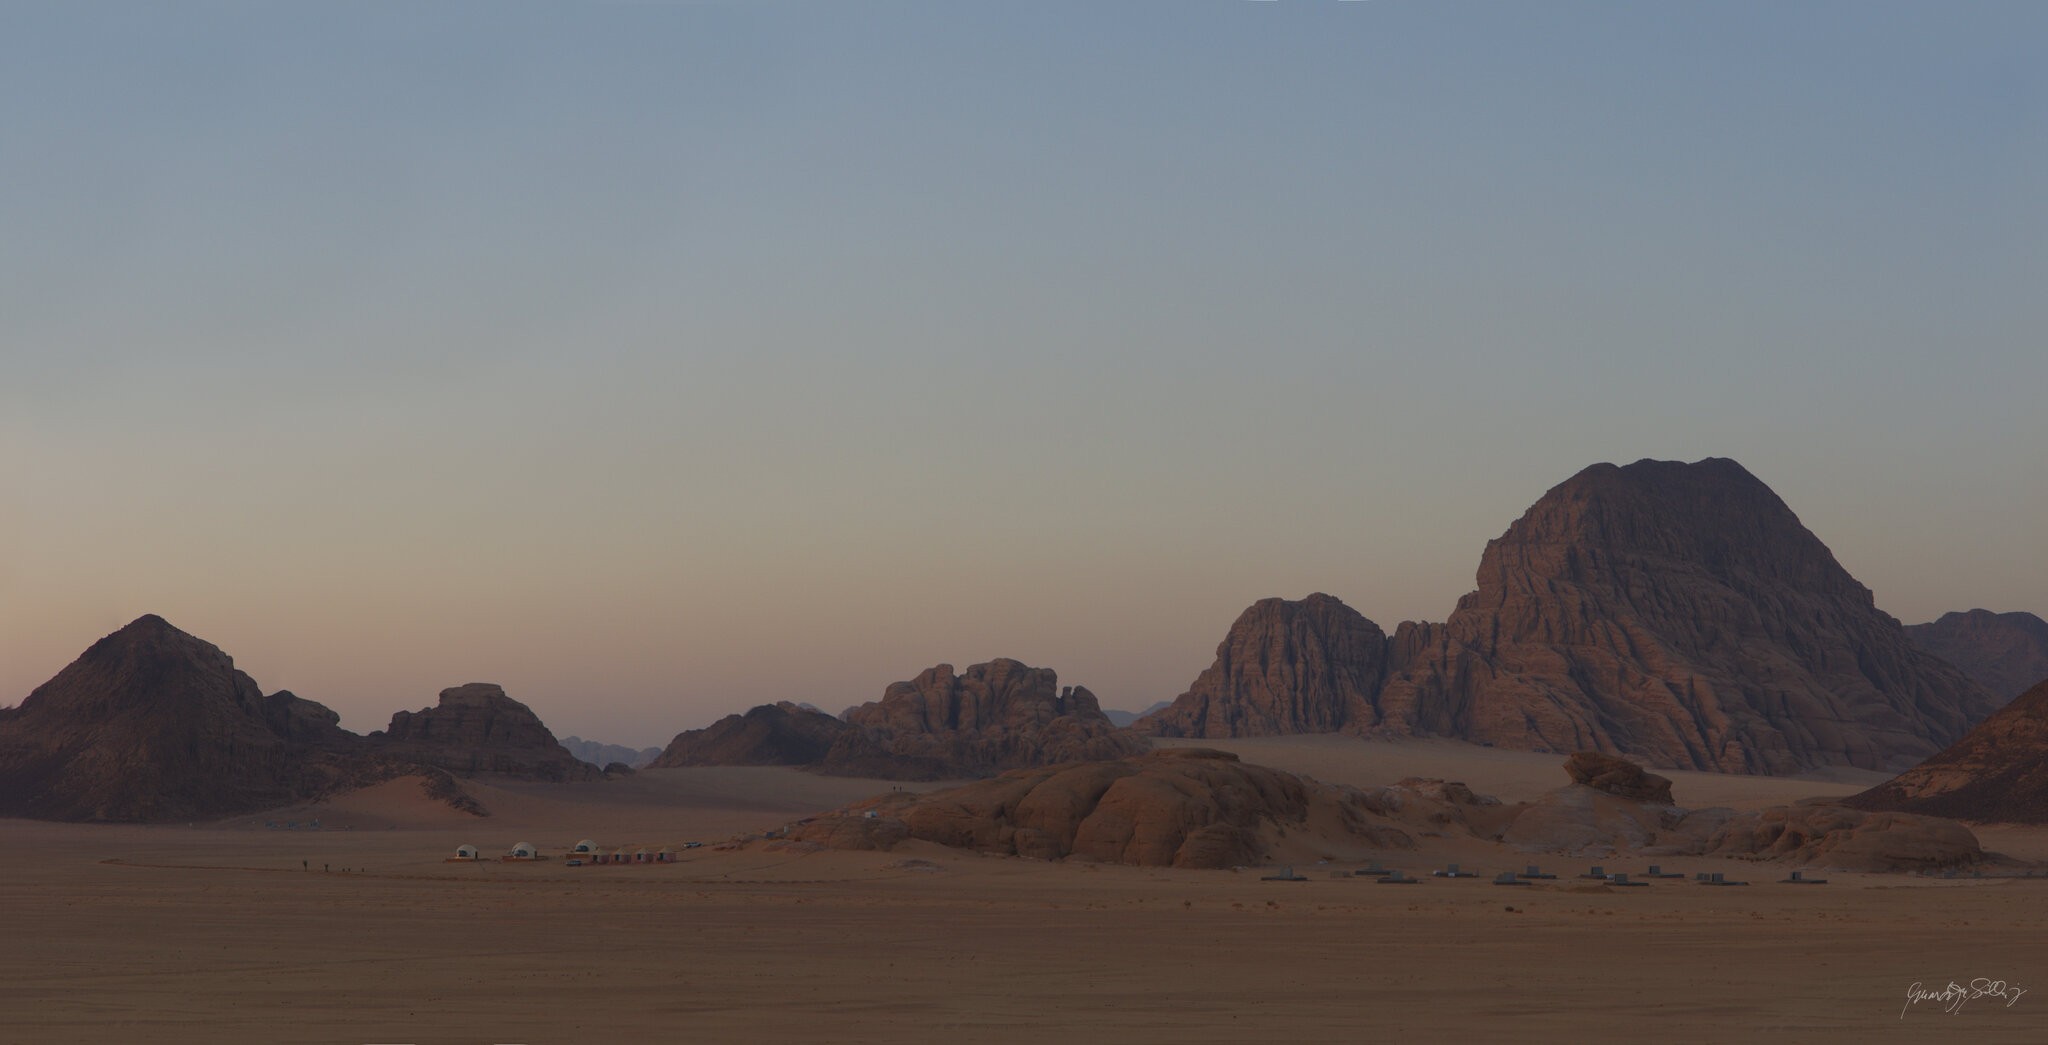 No this is not Planet Mars this is Wadi Rum